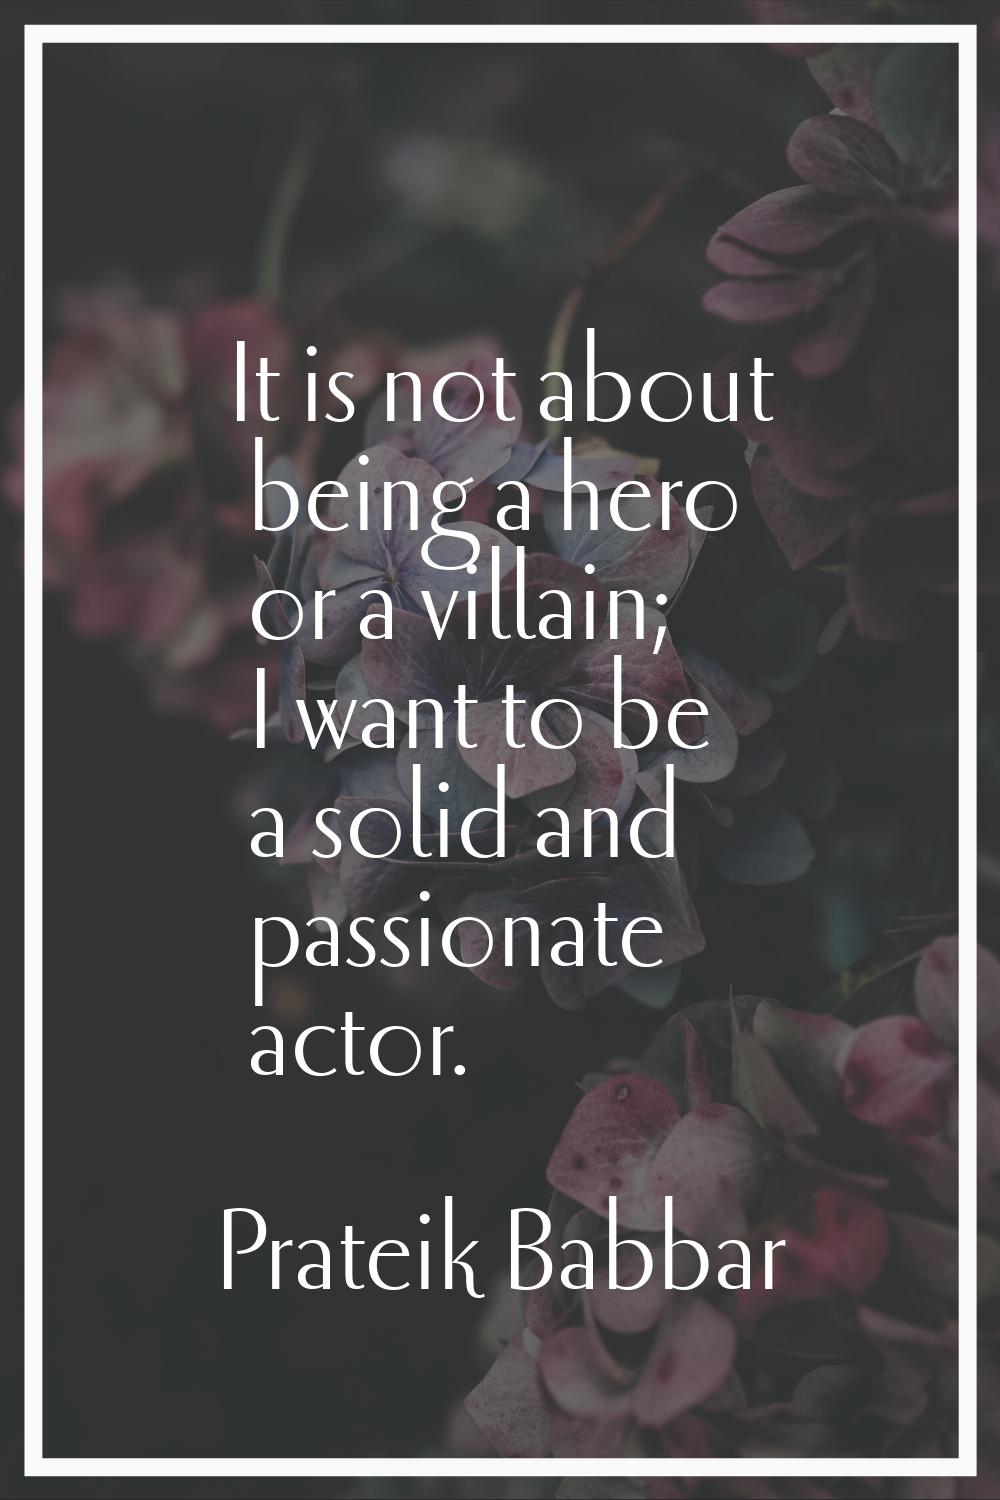 It is not about being a hero or a villain; I want to be a solid and passionate actor.